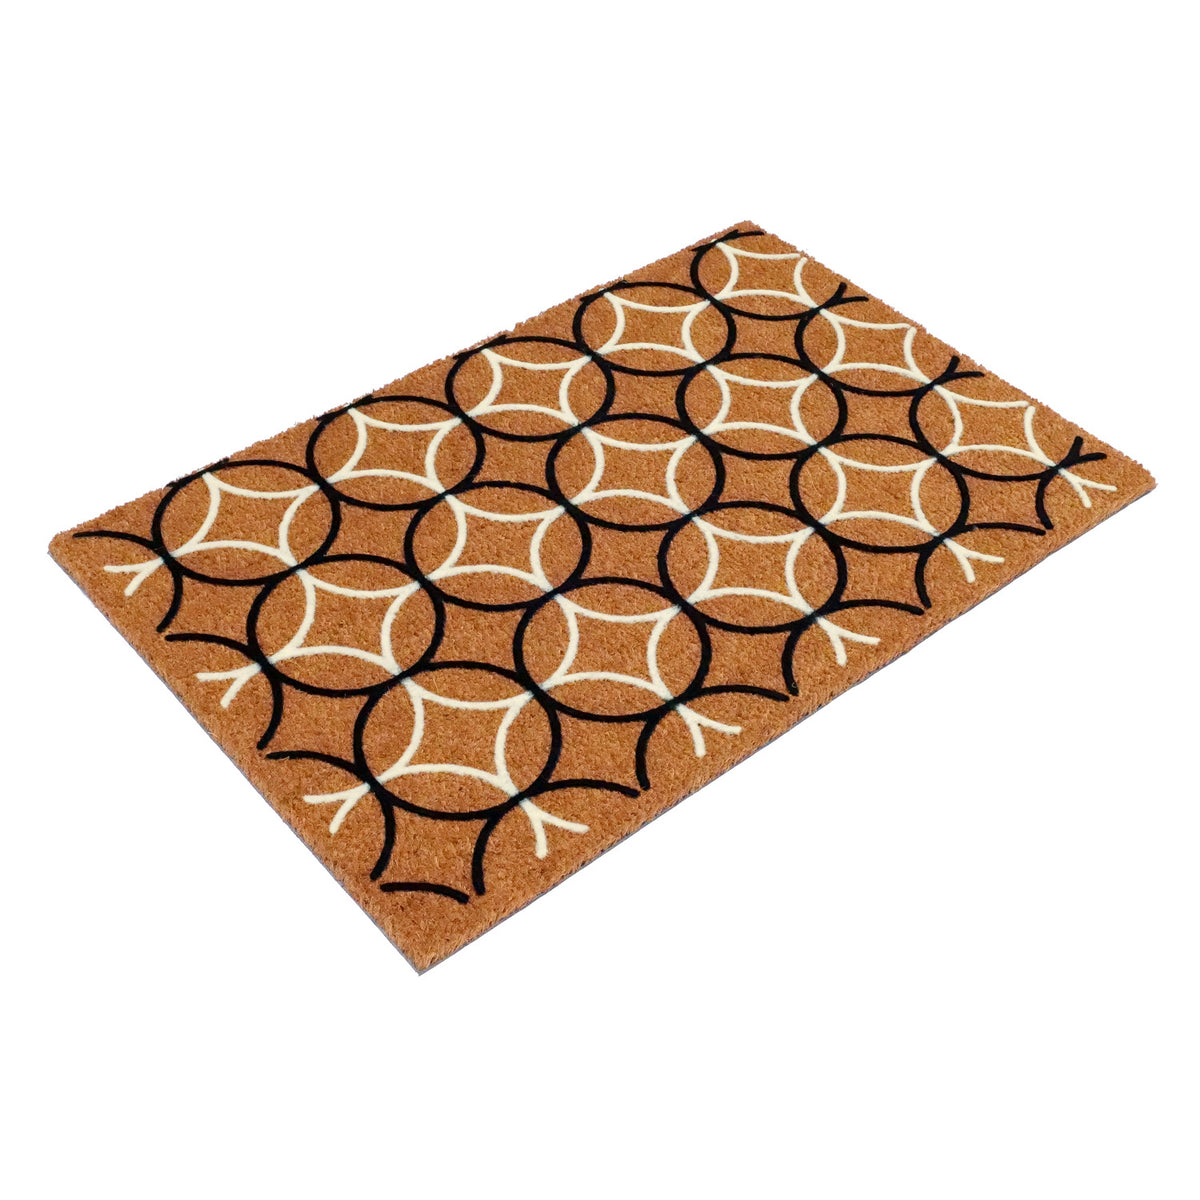 Swiss Flocked Circle Pattern Coir Mat - Azo-Free Print with Fade-Proof and Rubs-Resistance Features